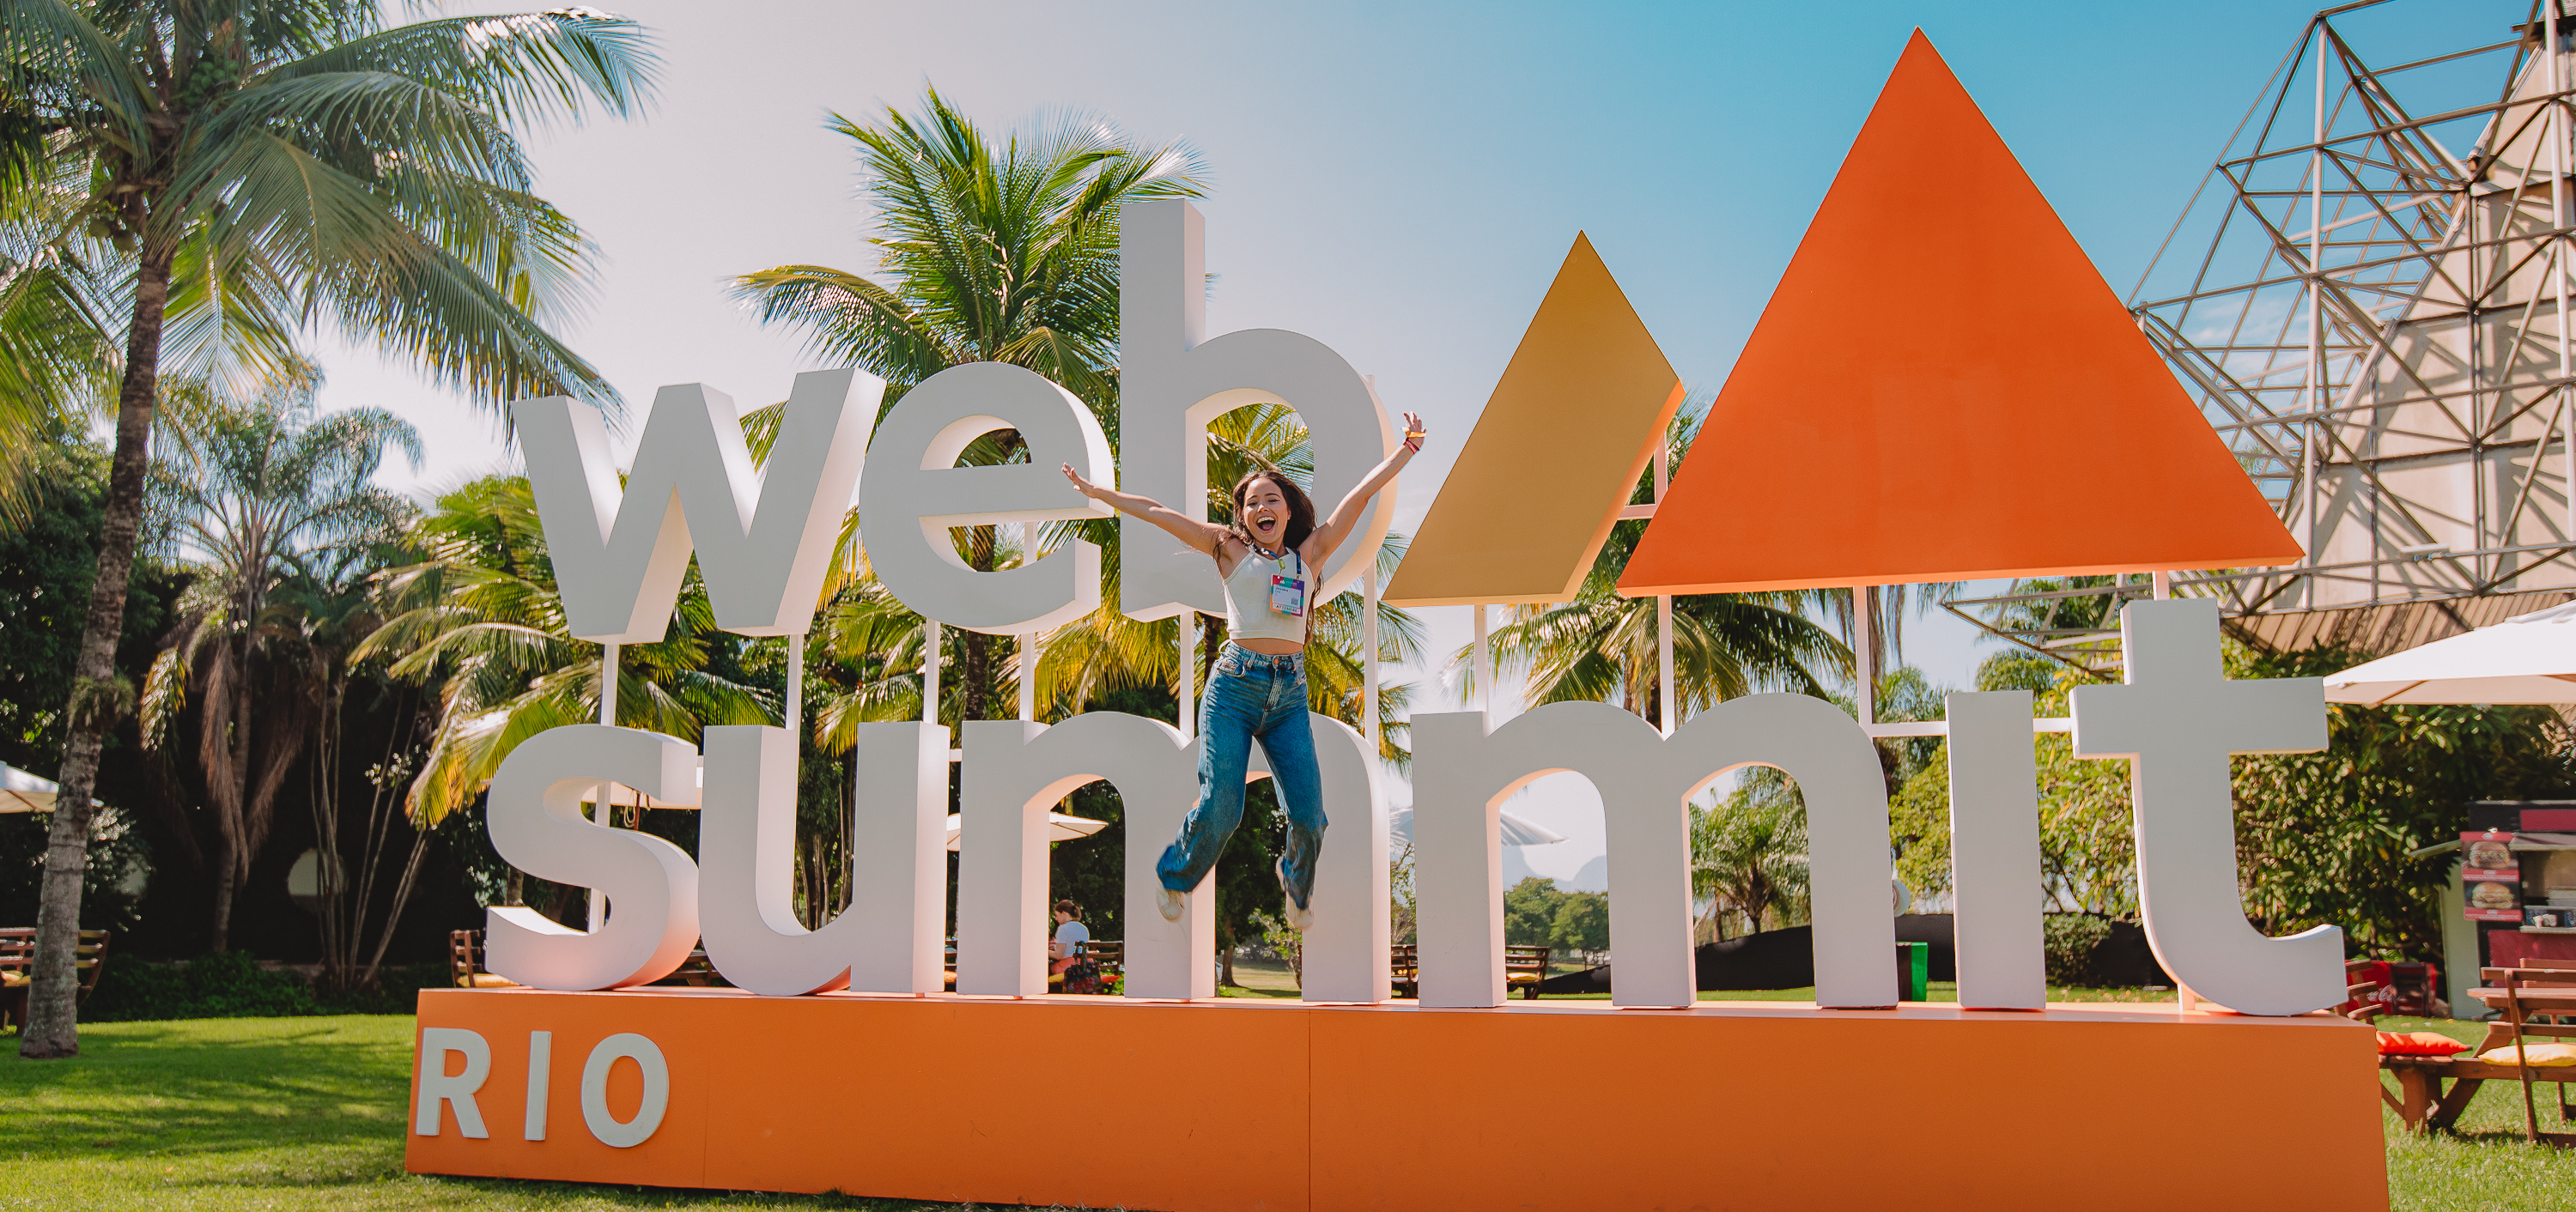 Web Summit Rio attendee leaps in front of a Web Summit Rio sign, on a bright day. There are palm trees visible in the background.